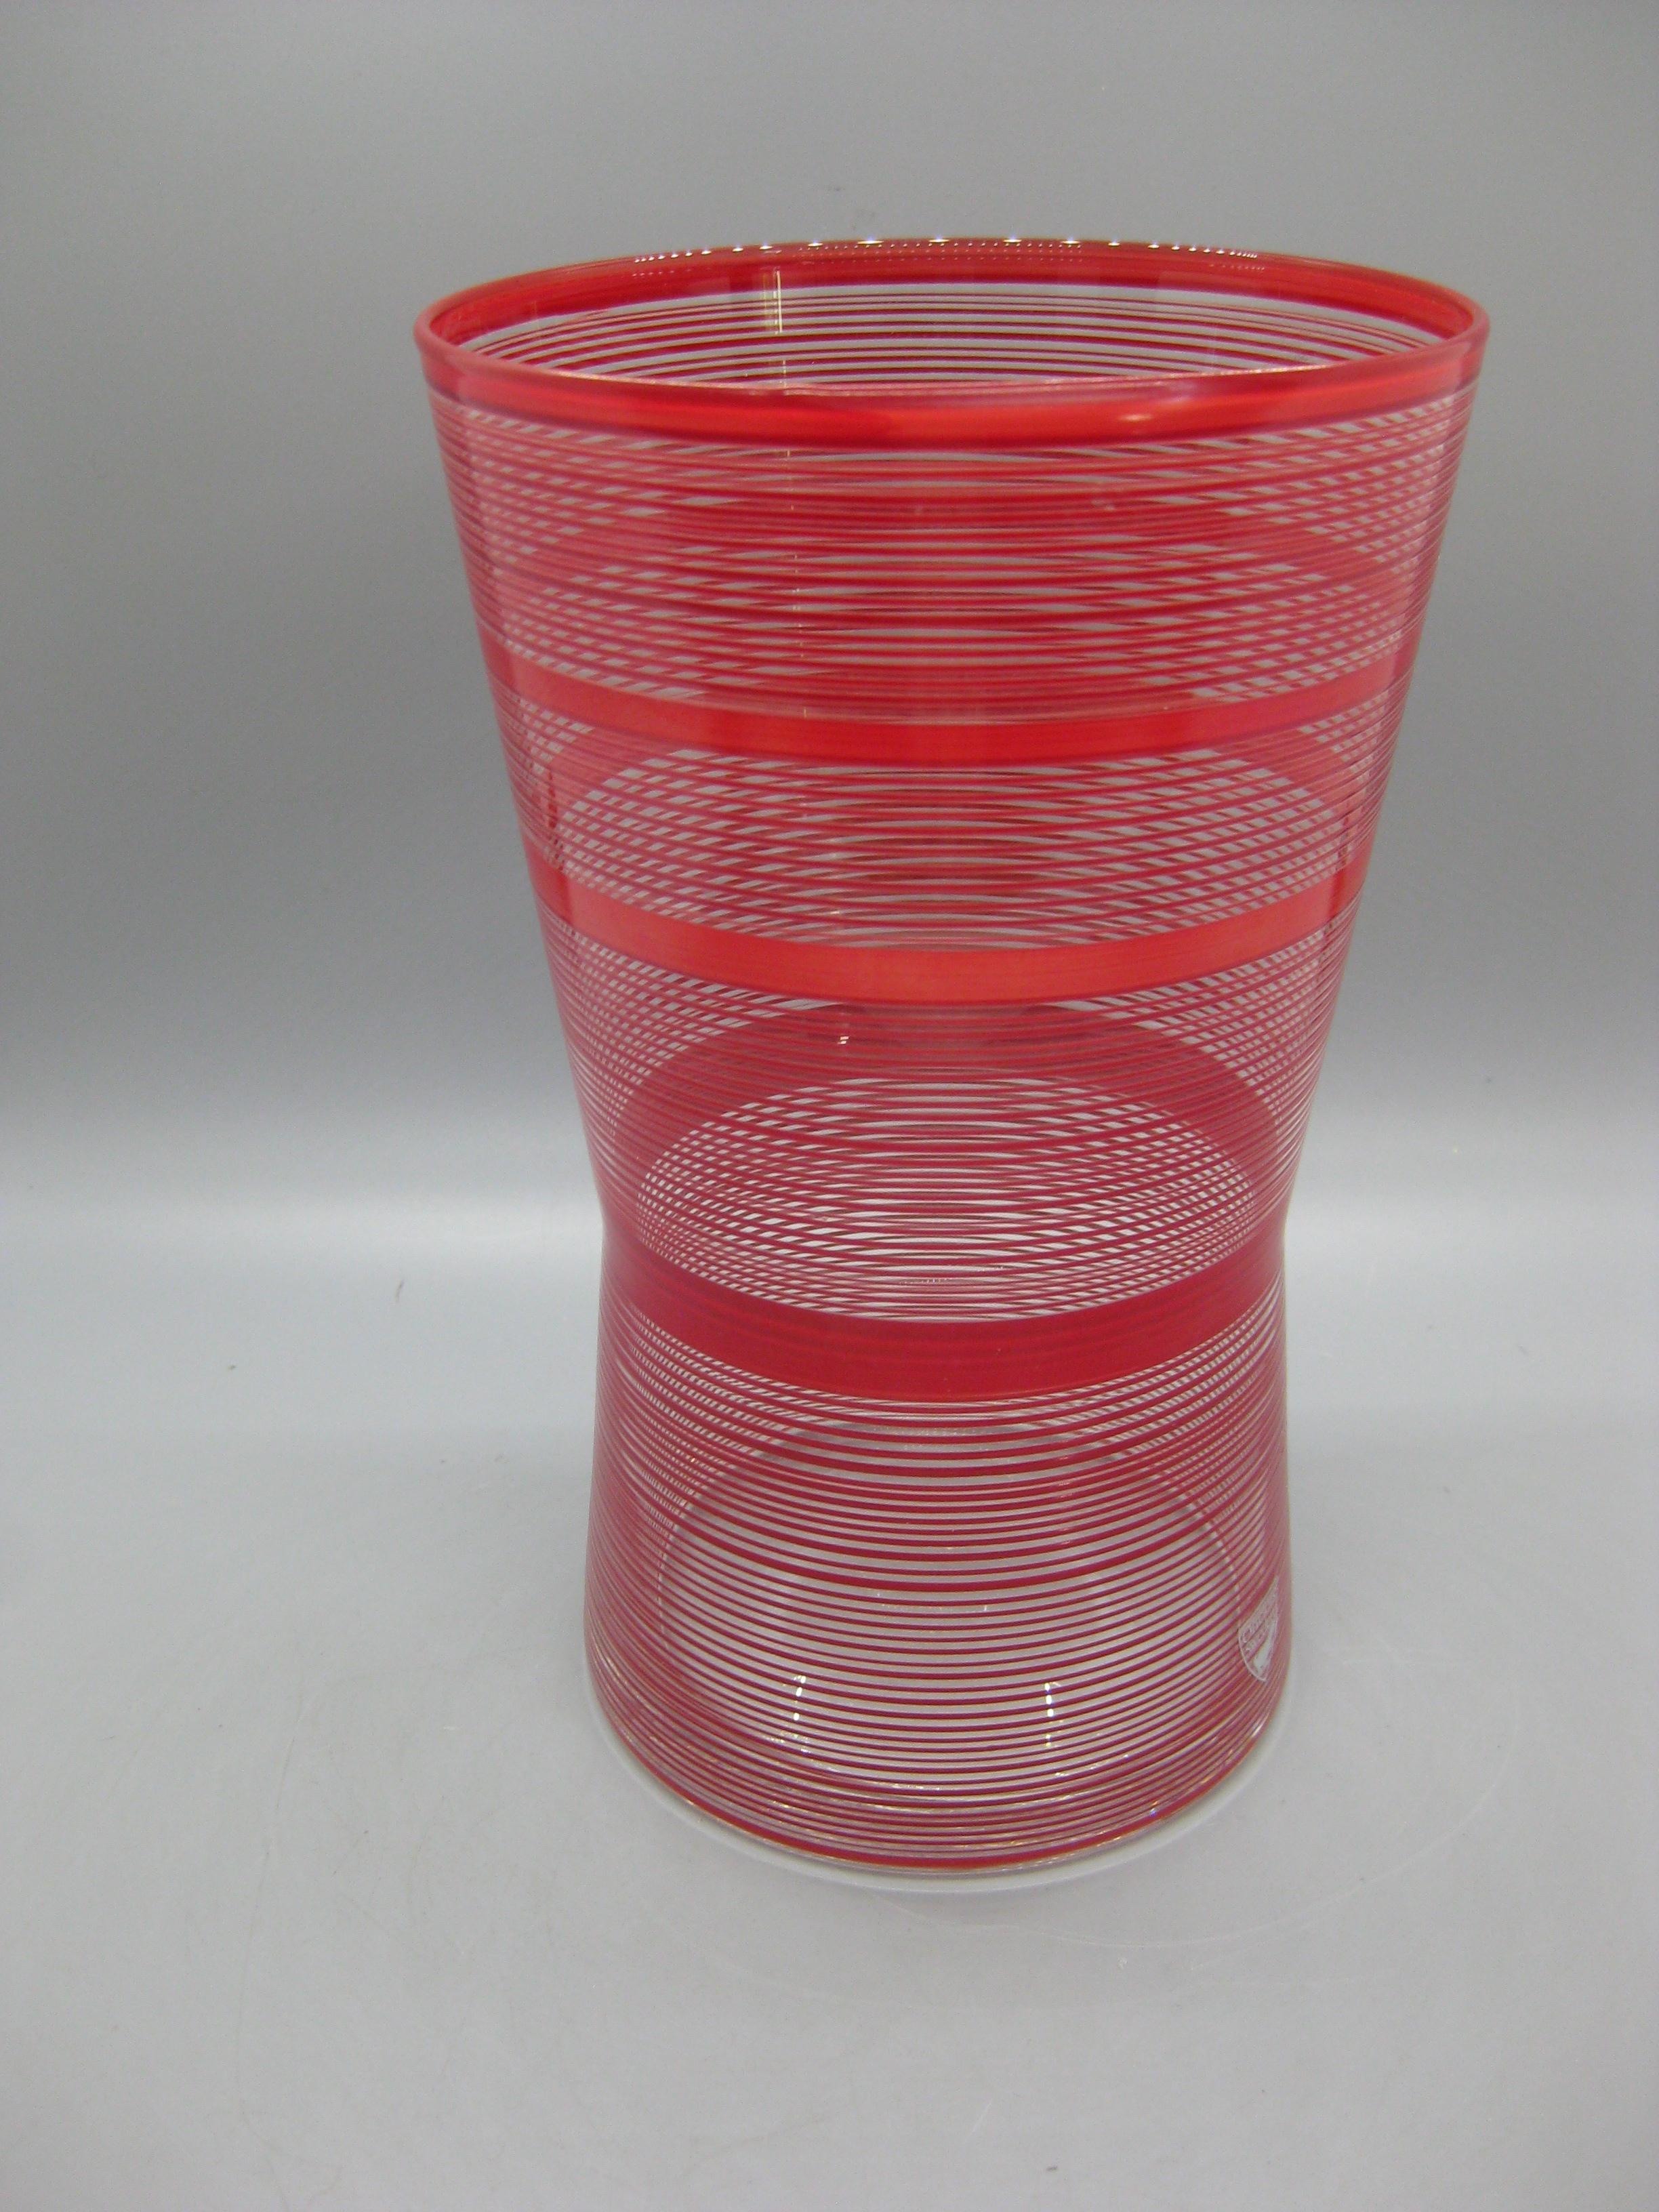 Beautiful Orrefors red striped art glass vase. Designed by Ingegend Raman and was made in Sweden. The vase appears to have never been used. Signed on the bottom and has the original tag on the lower edge. In excellent condition. Color is great and